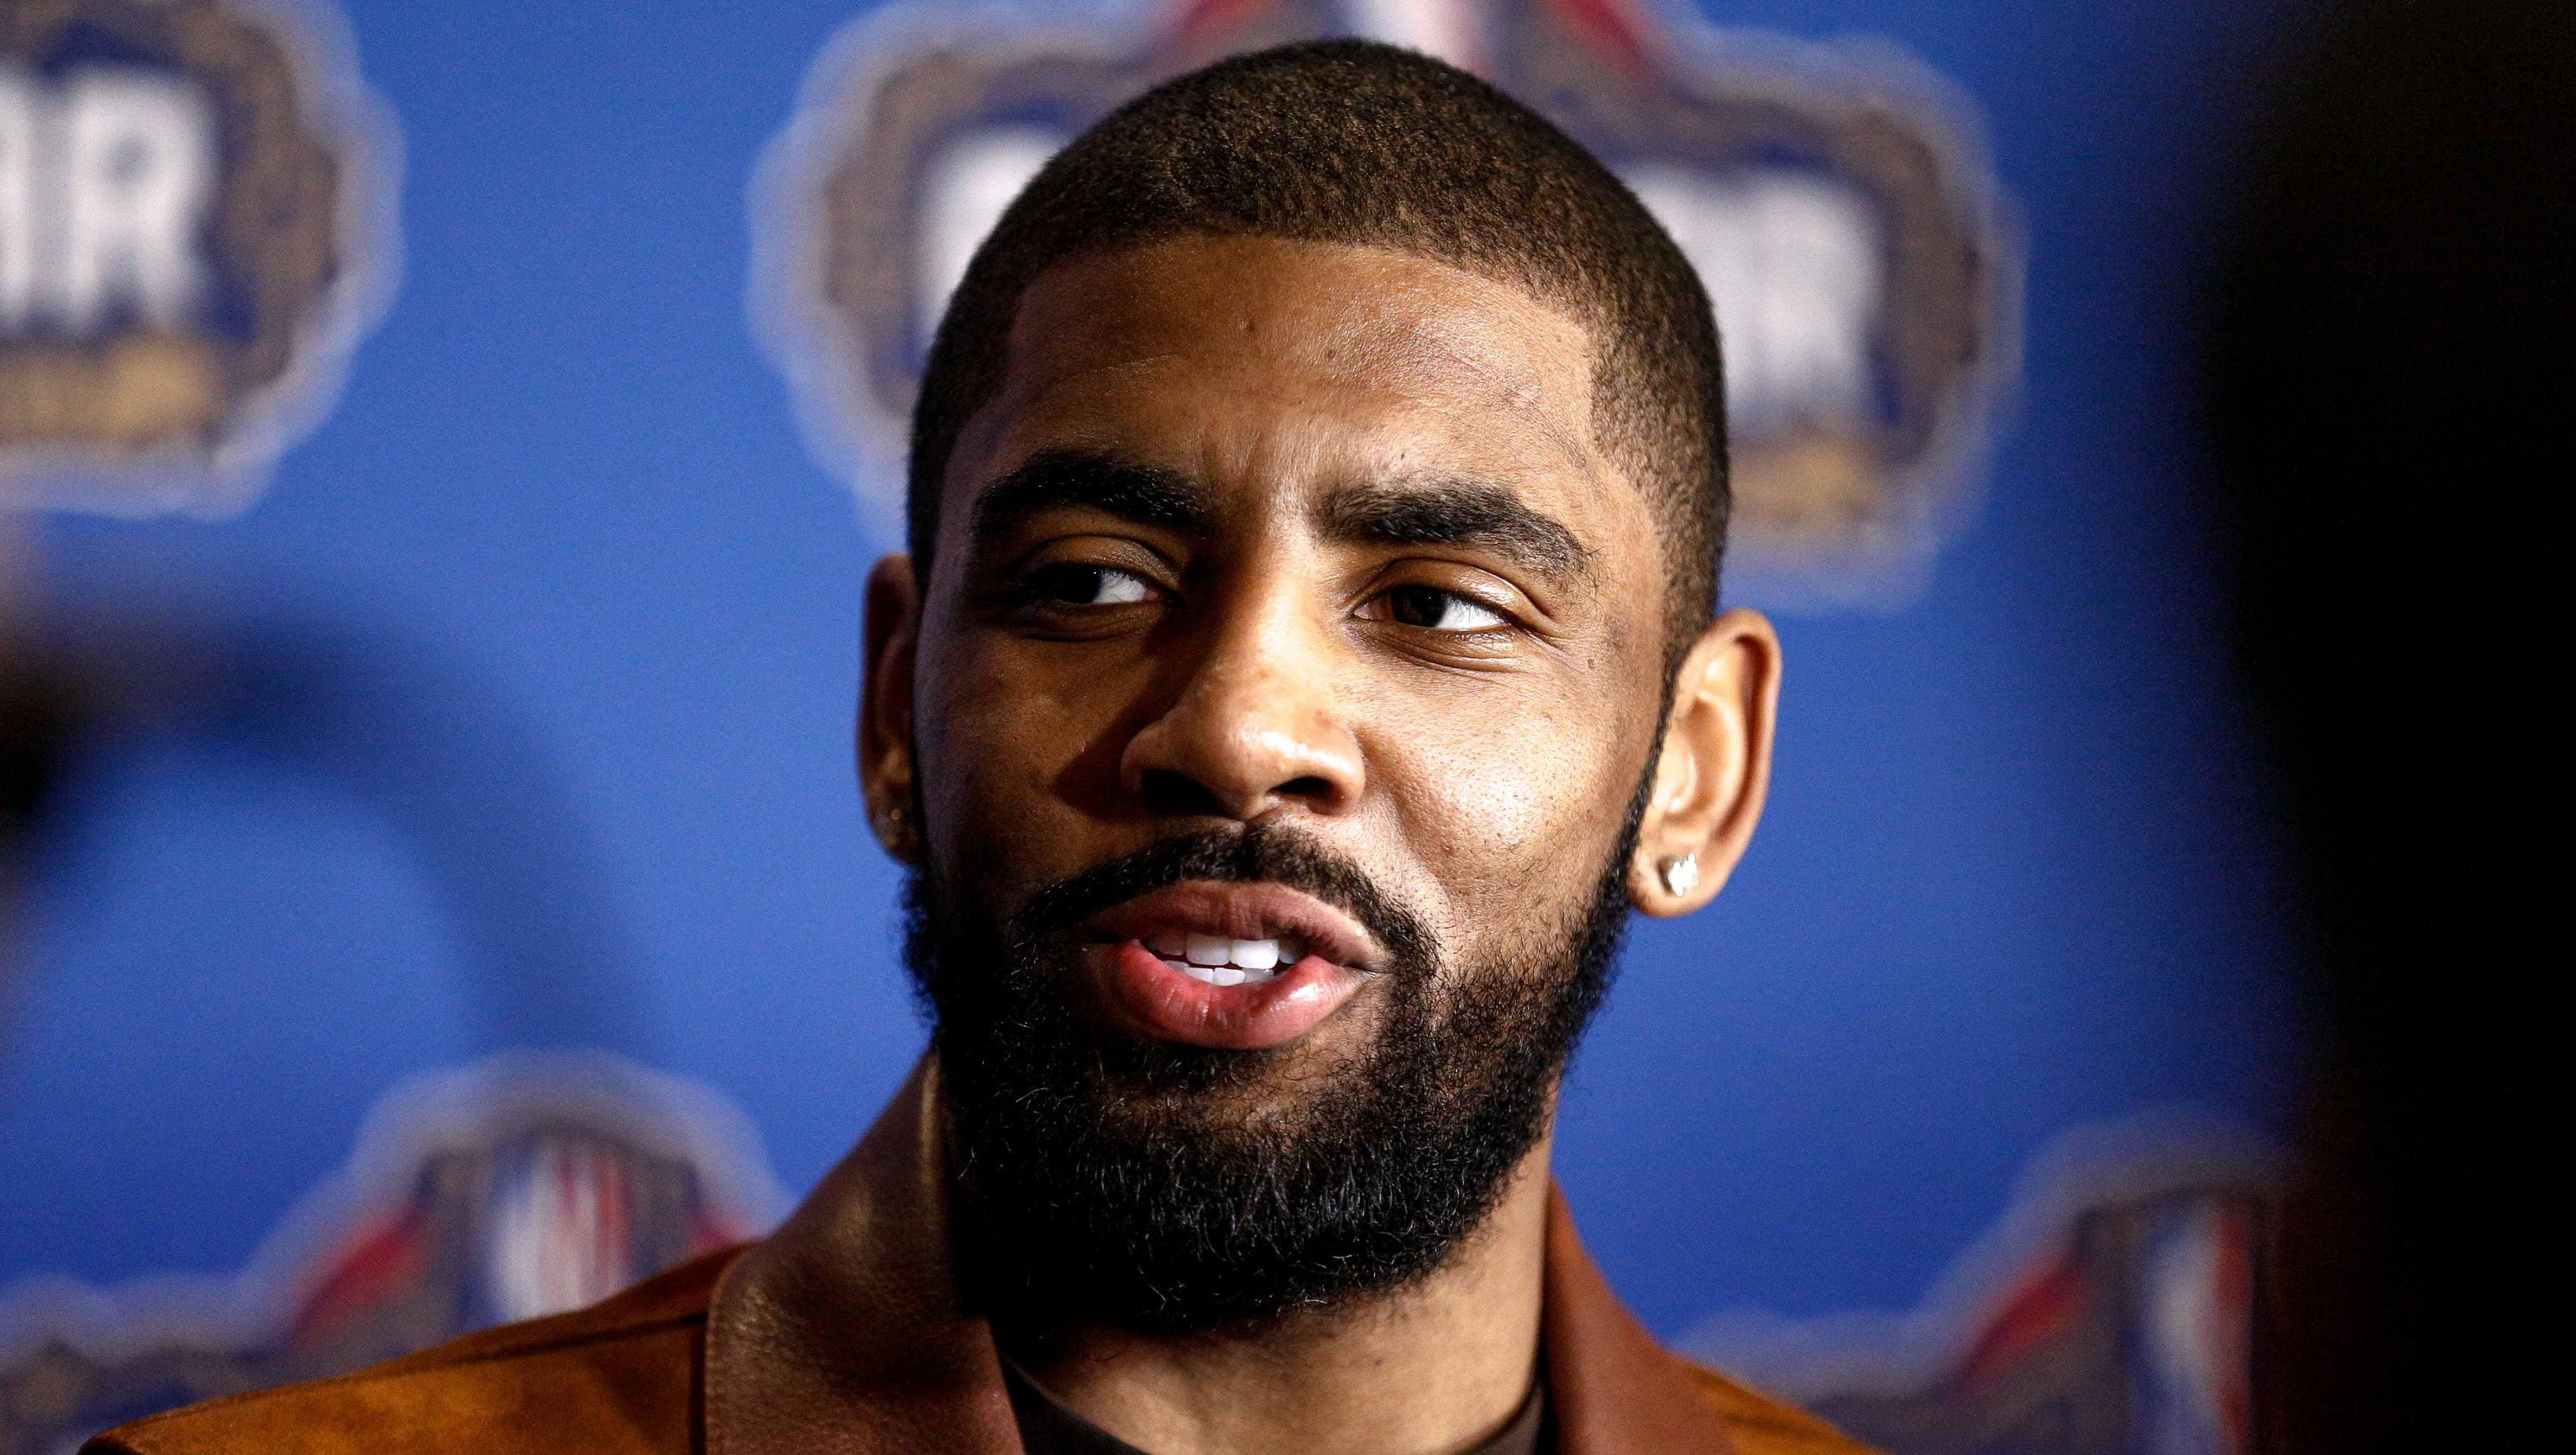 Cavaliers All-Star Kyrie Irving legitimately believes the Earth is flat3200 x 1680